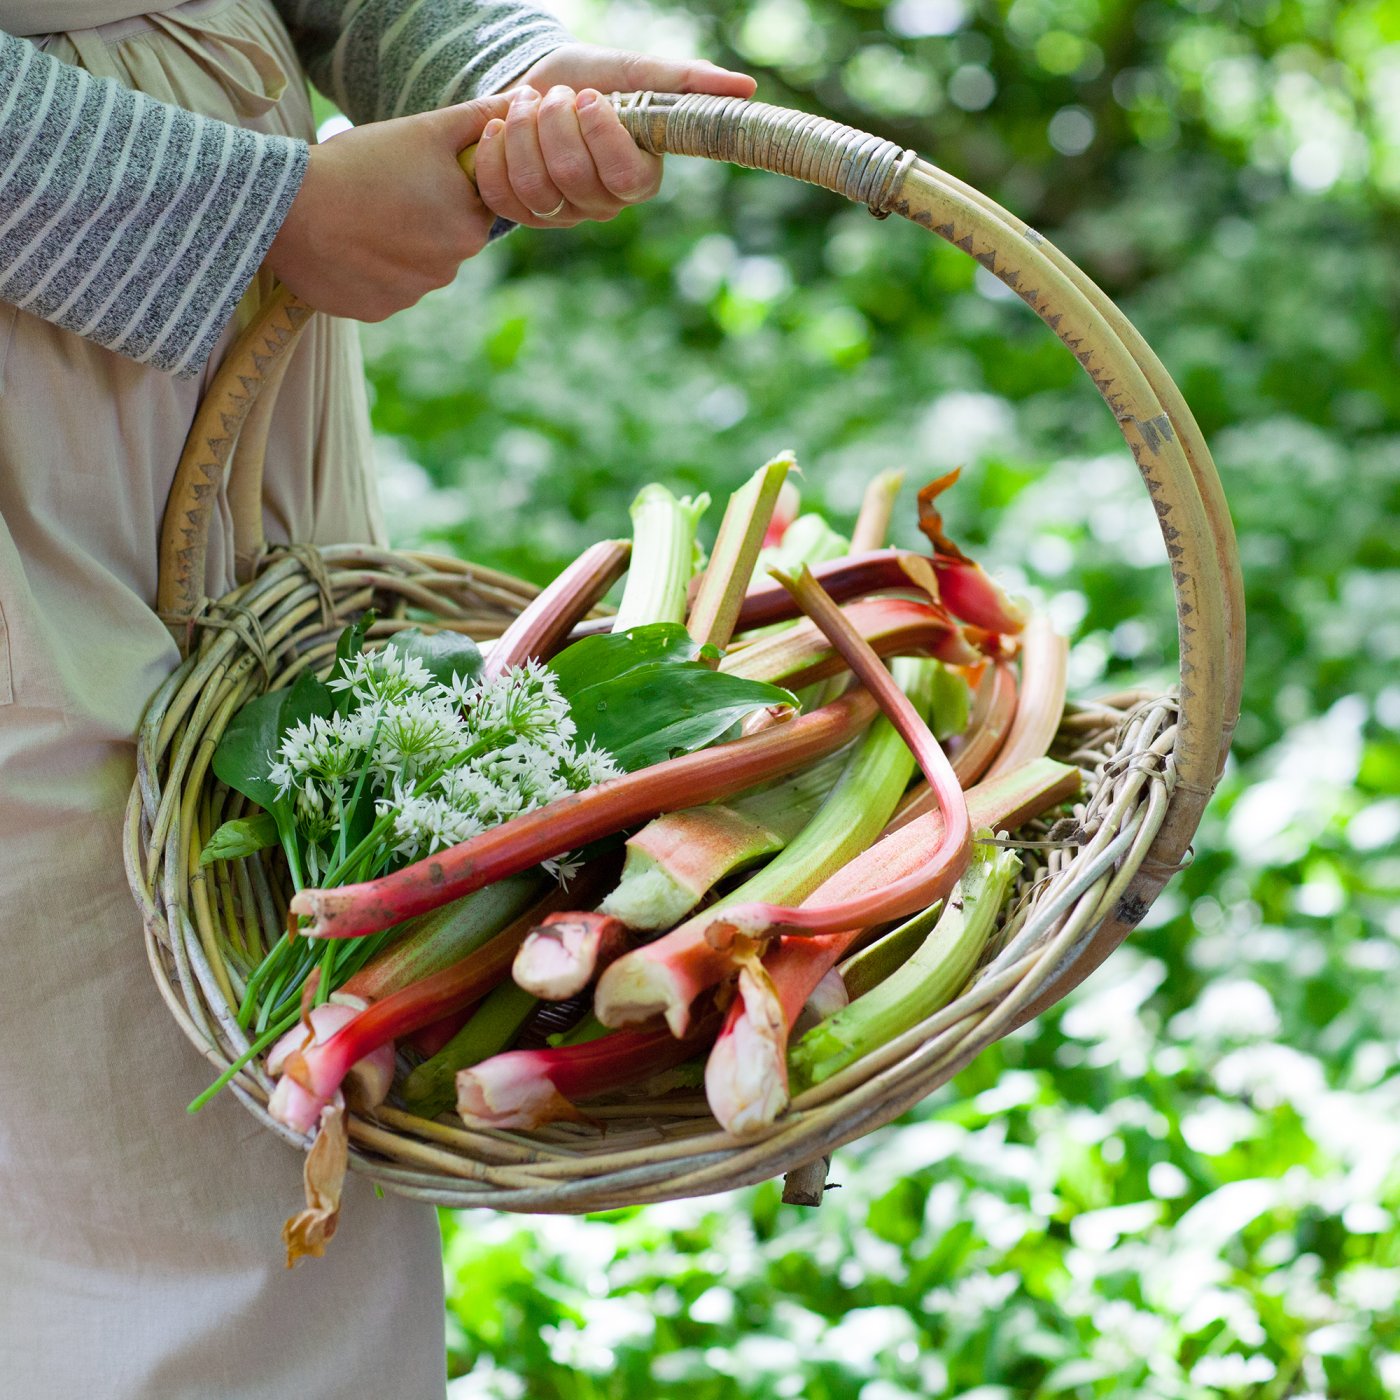 A lady foraging in the countryside carrying a basket of freshly picked rhubarb